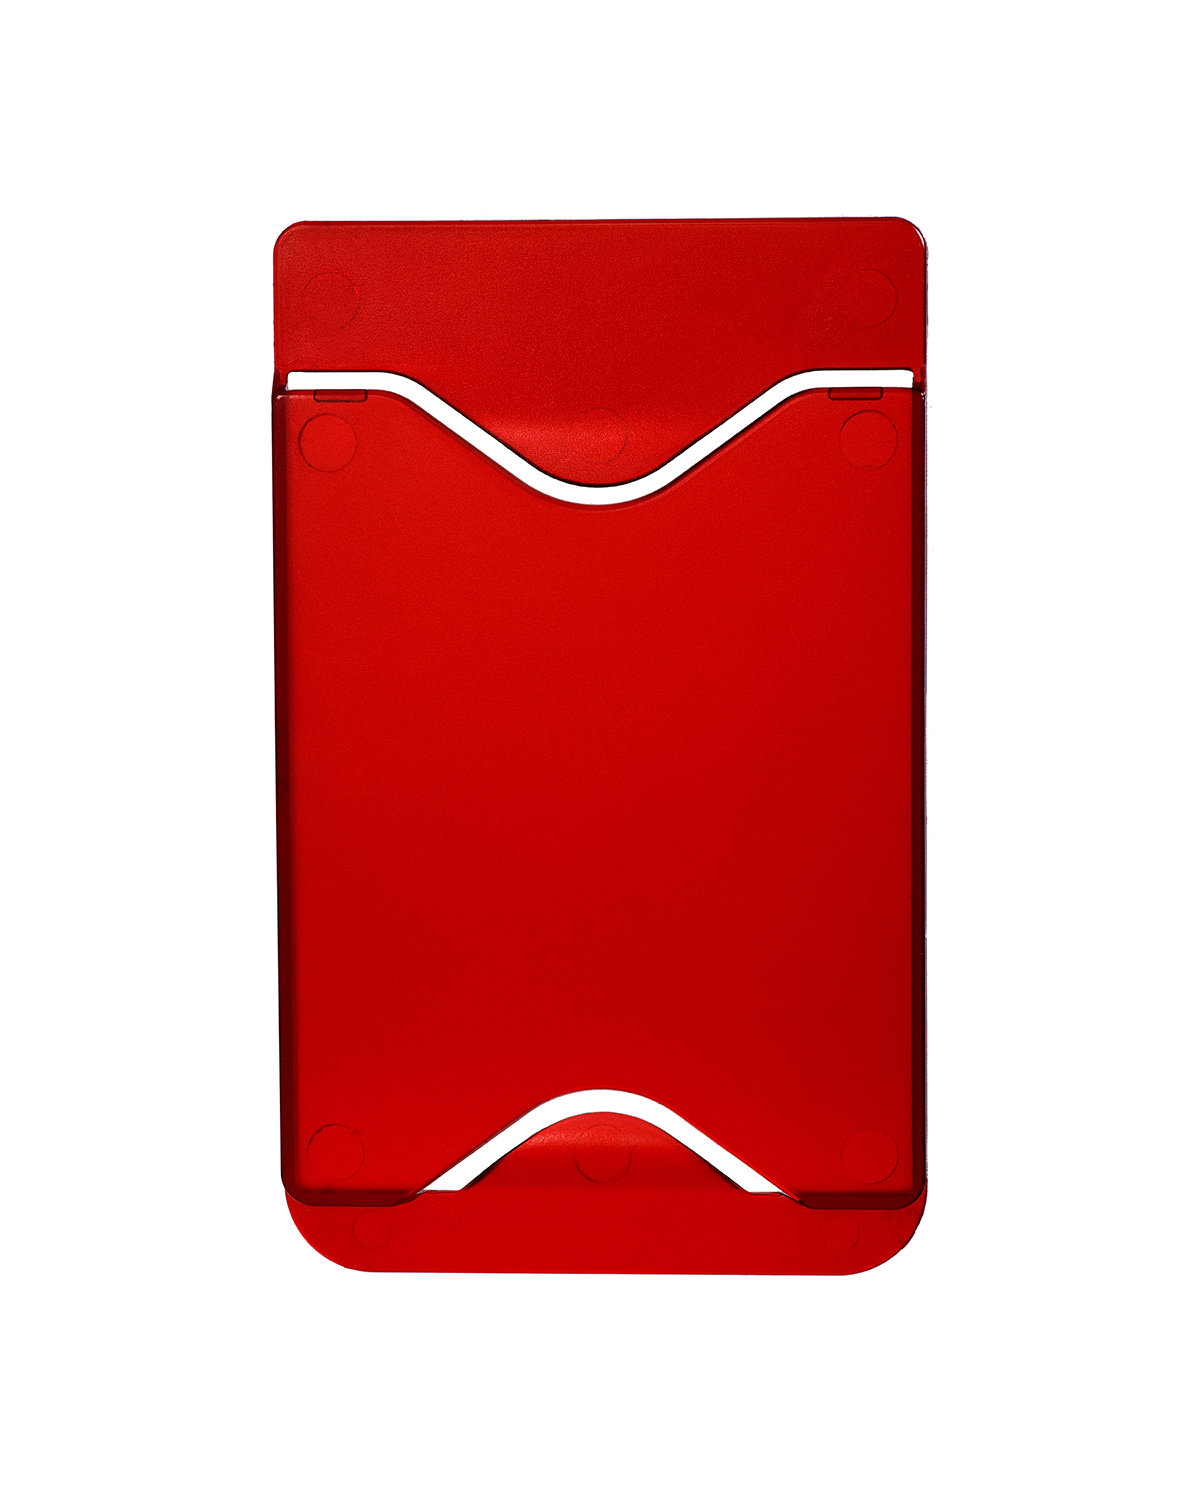 Prime Line Promo Mobile Device Card Caddy translucent red 